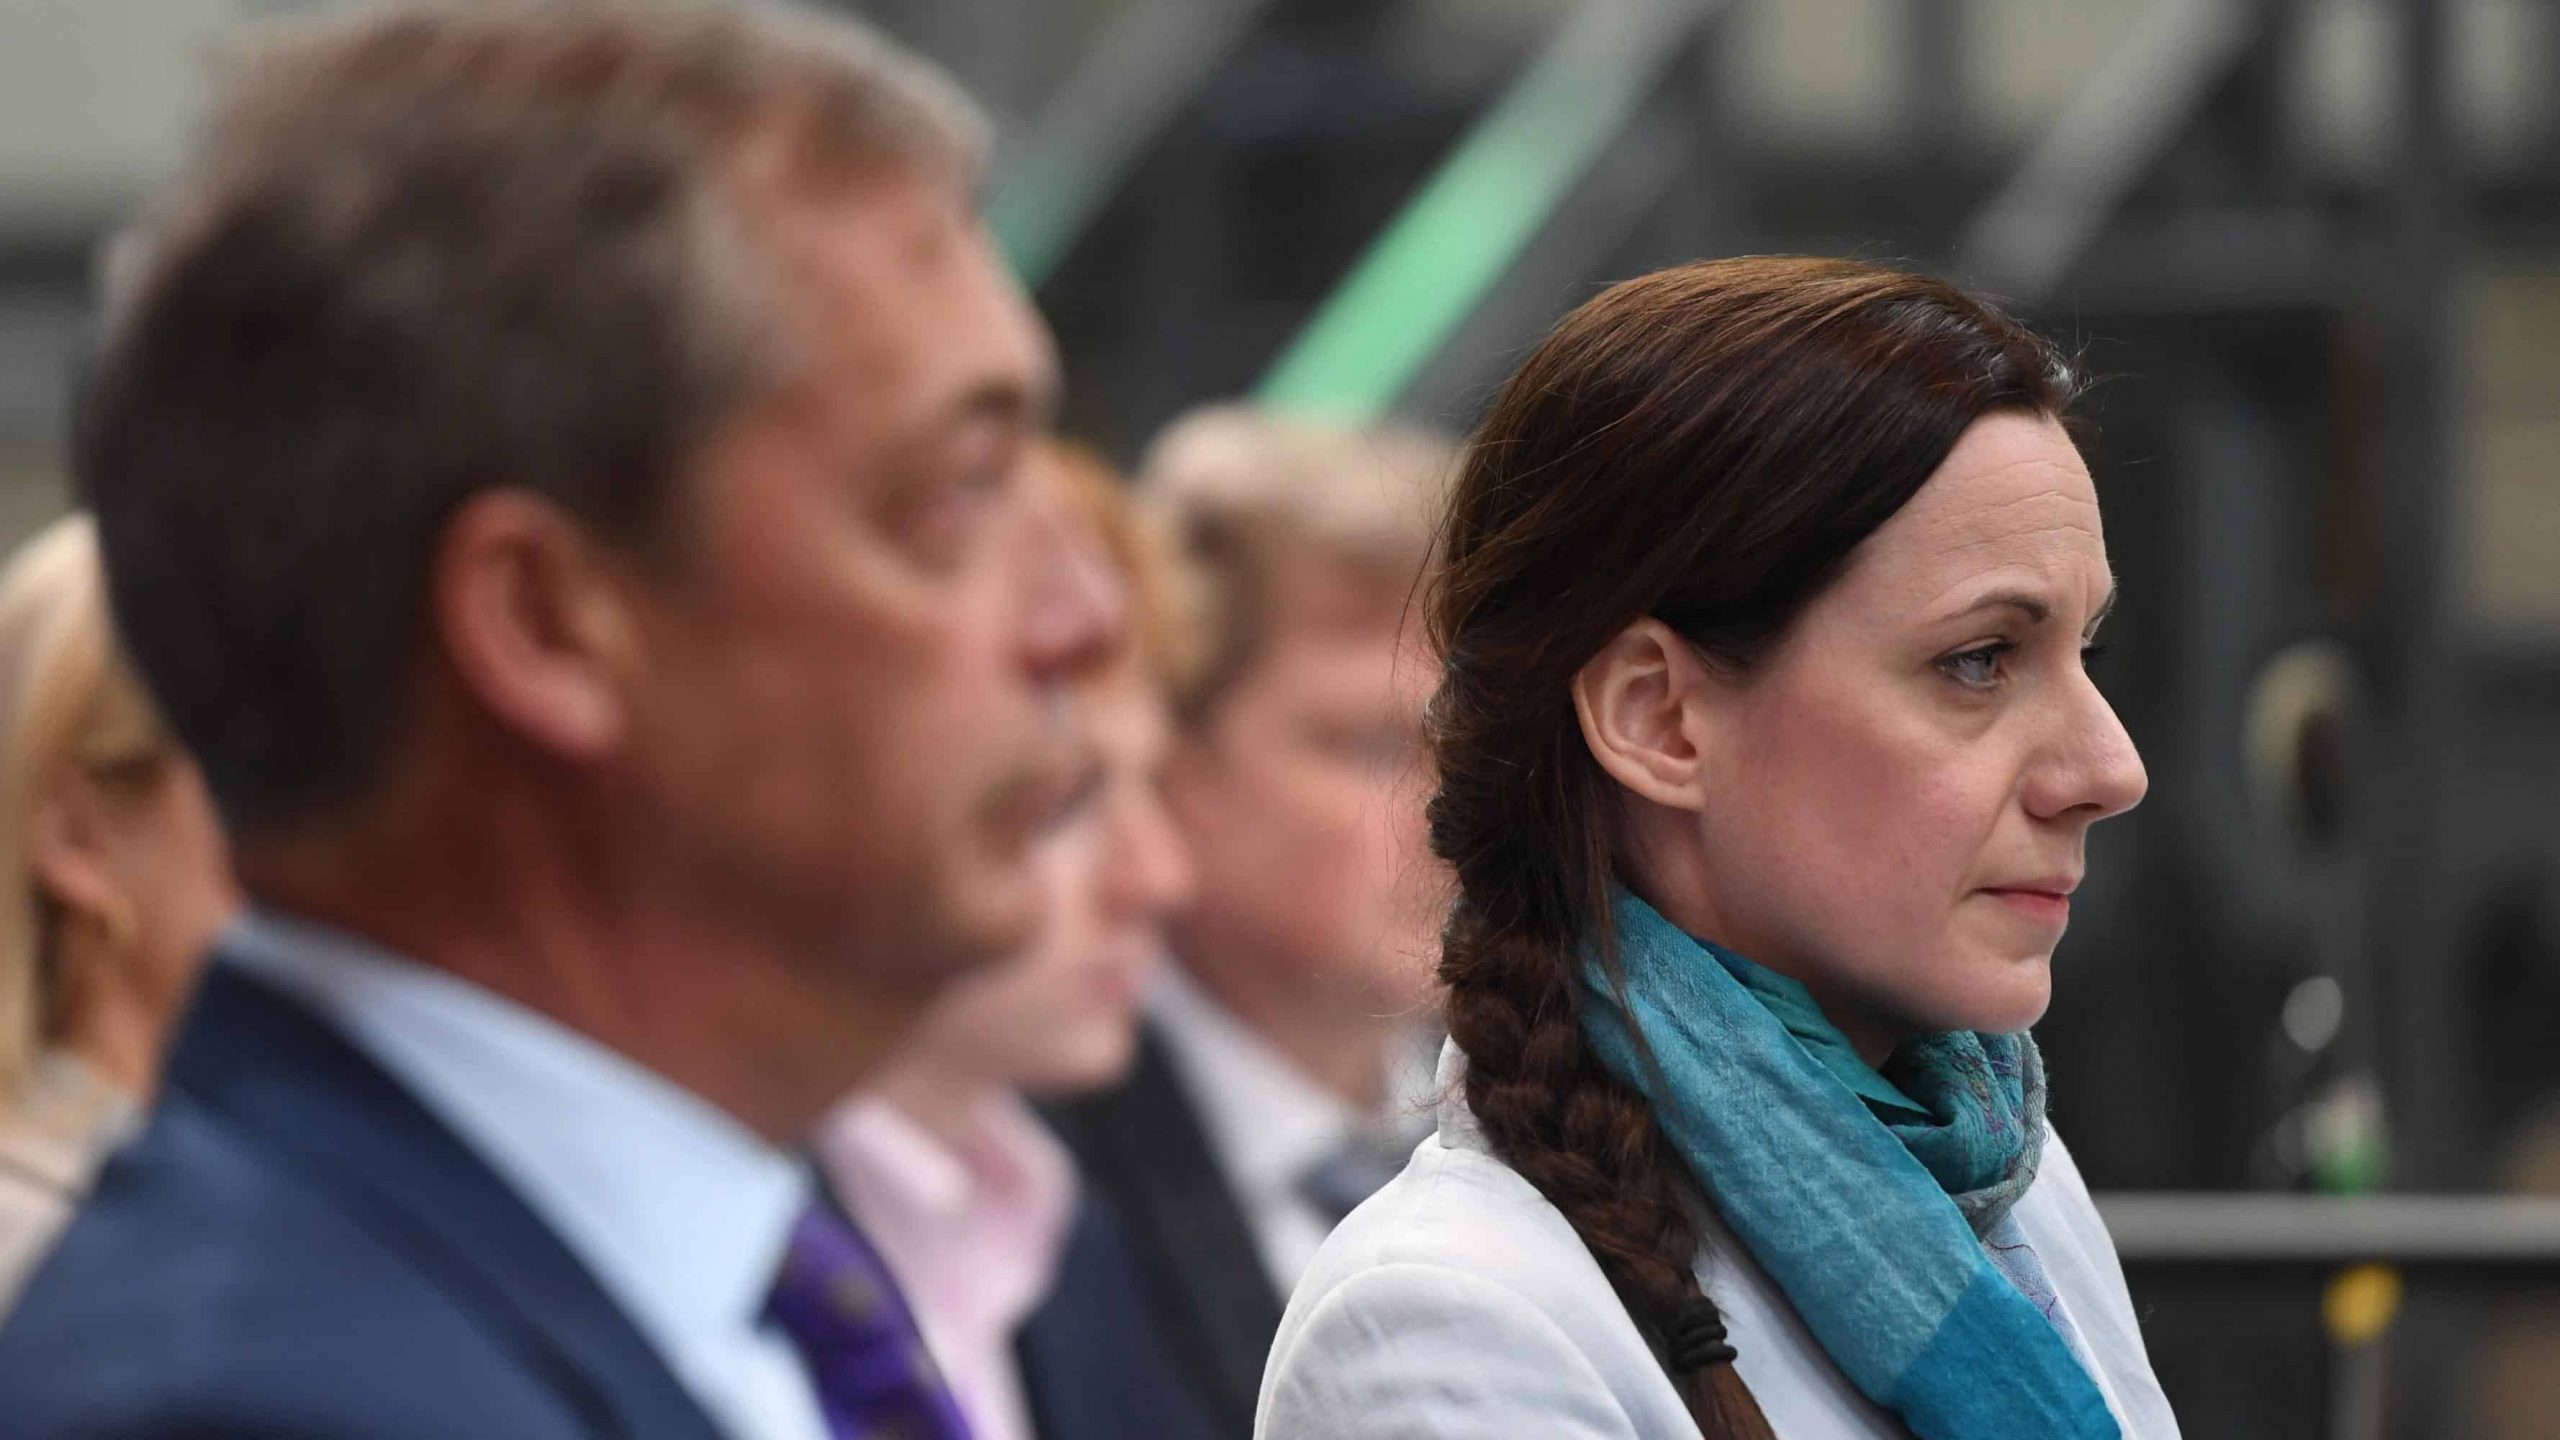 Jacob Rees-Mogg’s sister and other ex-Brexit Party MEPs with bizarre views join Tories